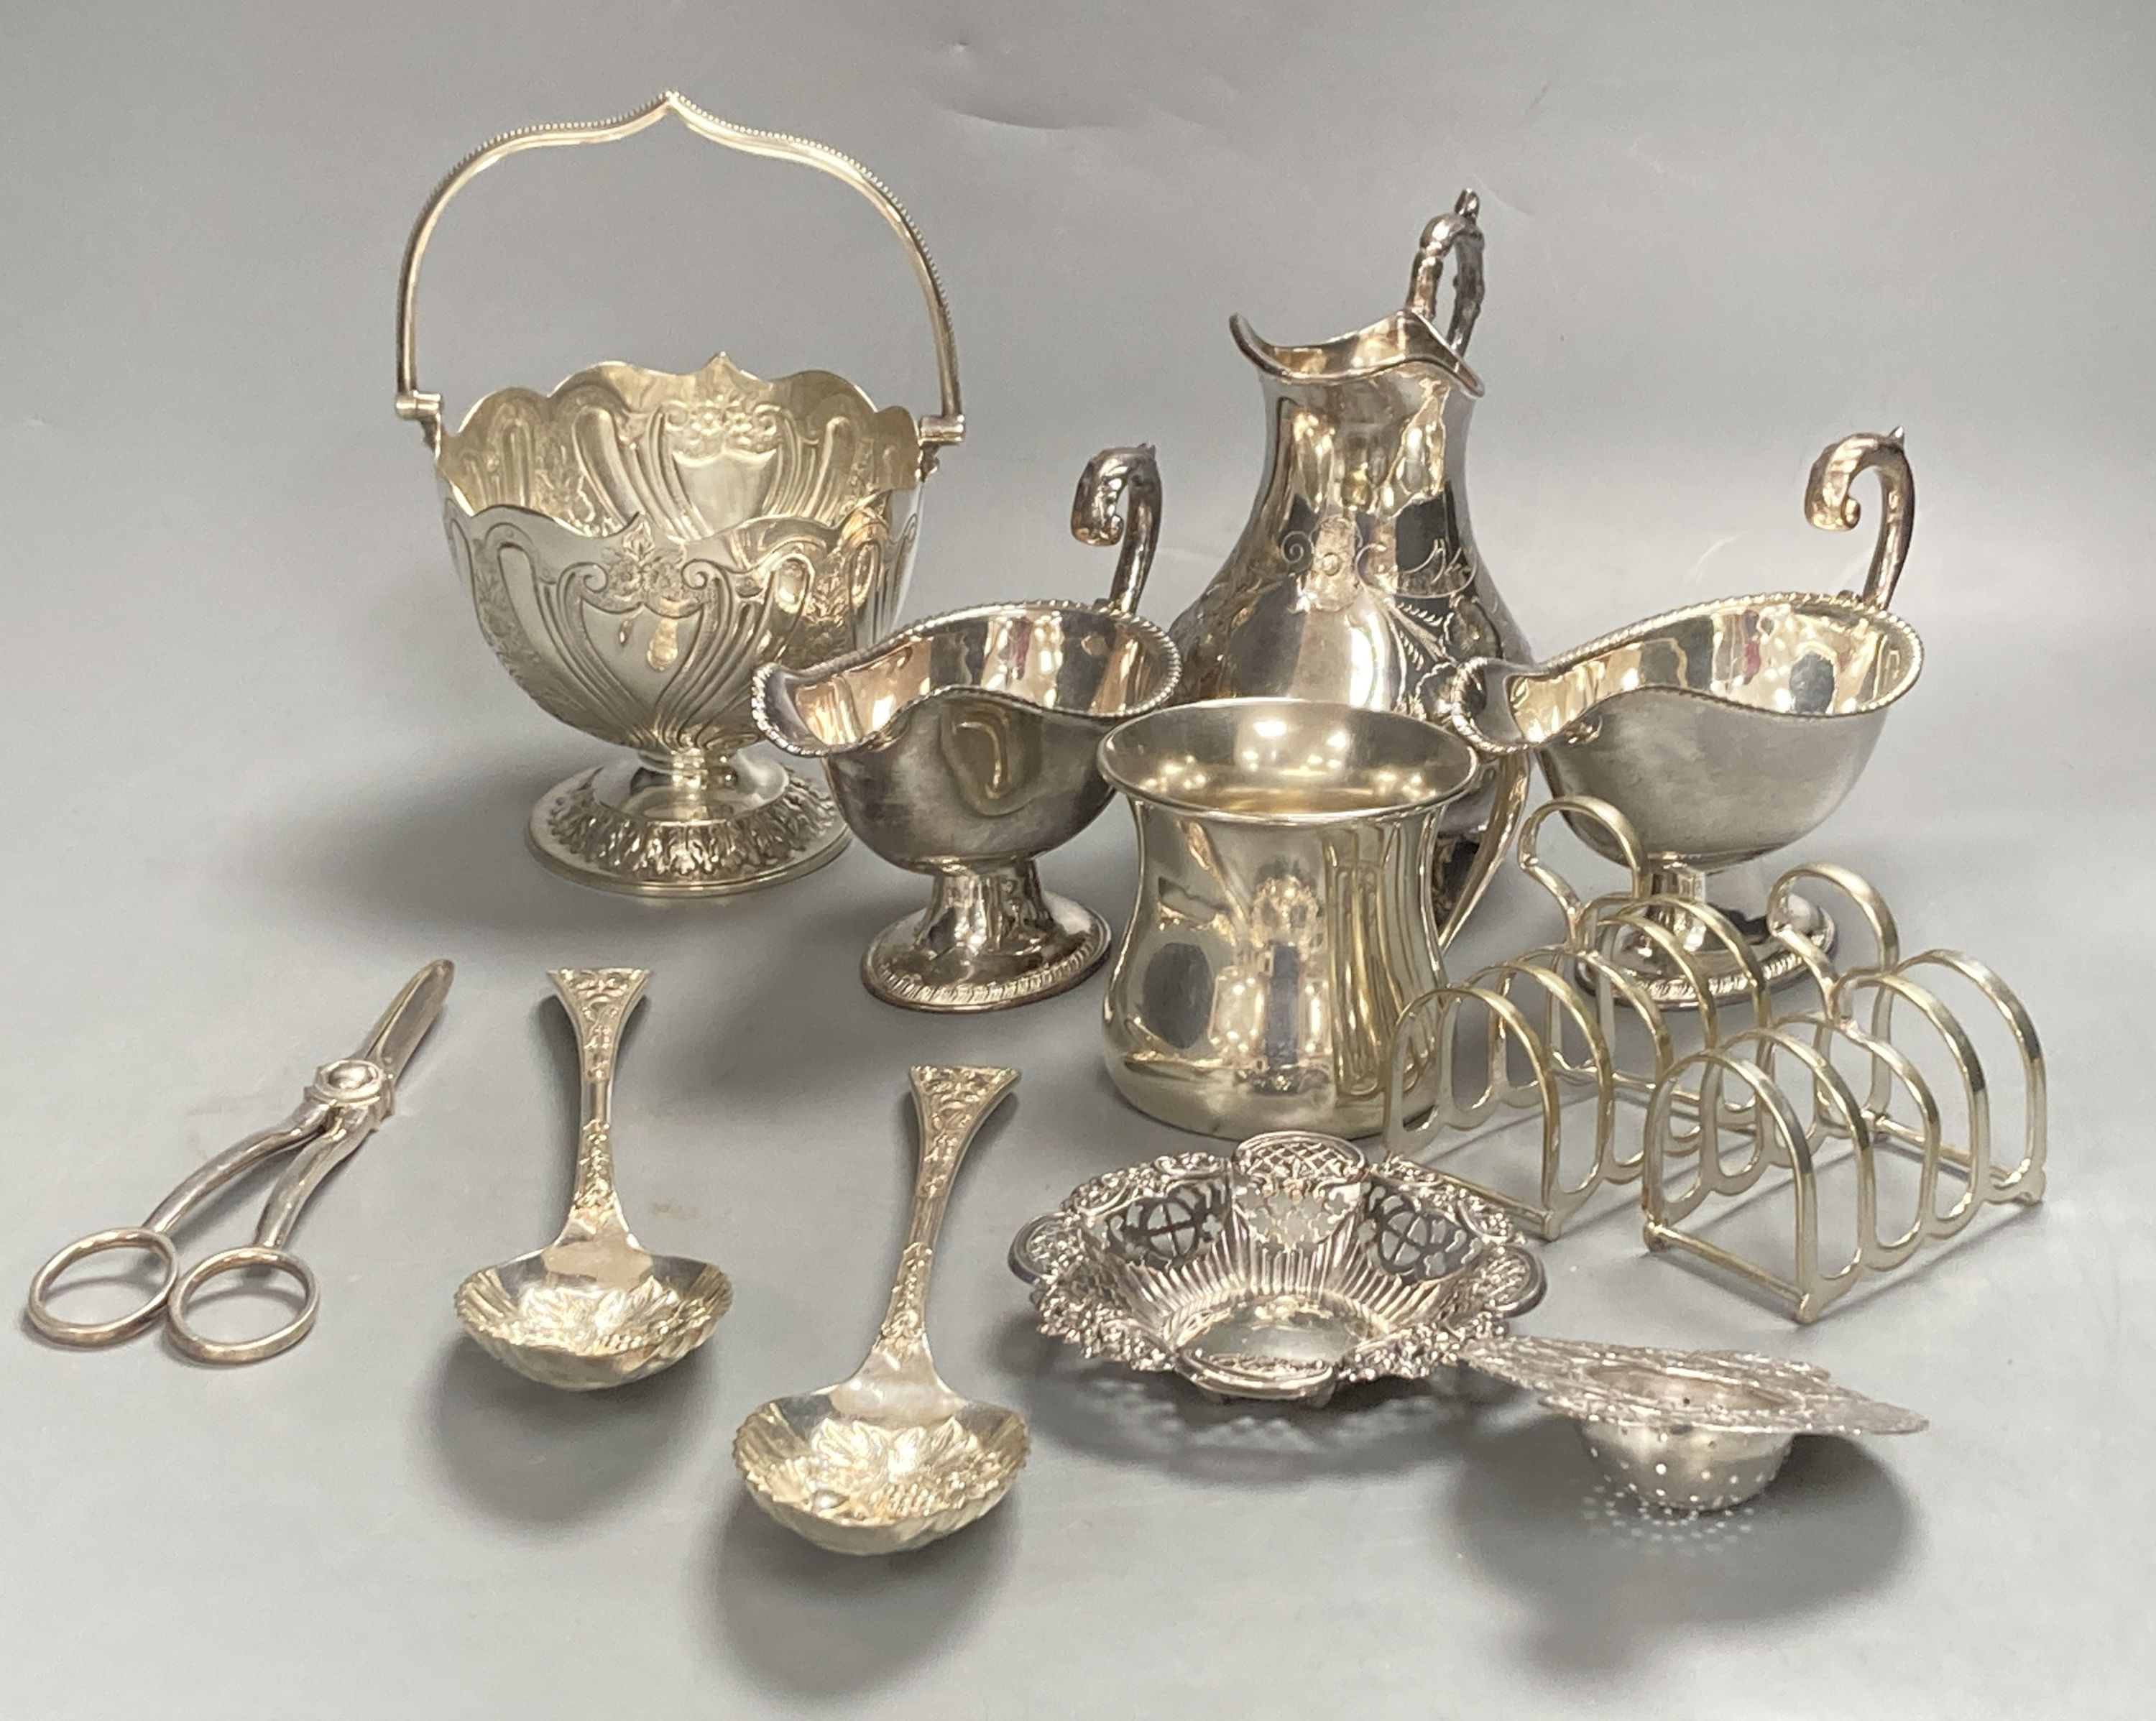 A sterling mug, a silver bonbon dish, a white metal strainer and a group of minor plated items.